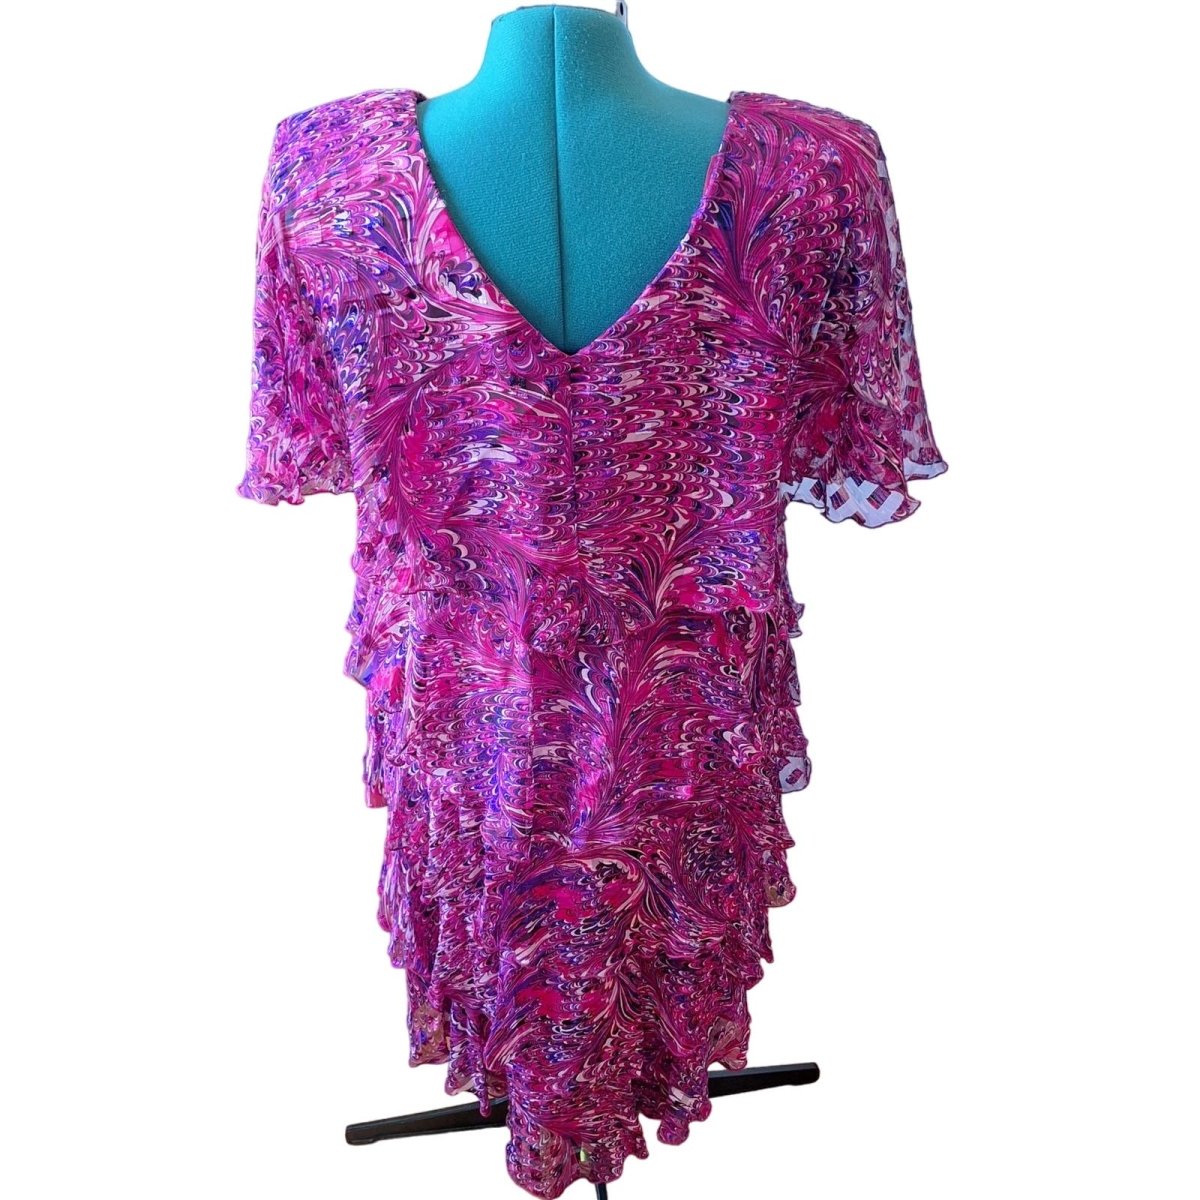 Vintage 70s/80s Hot Pink/Purple Swirl Ruffled Flutter Sleeve Dress Women Size Large - themallvintage The Mall Vintage